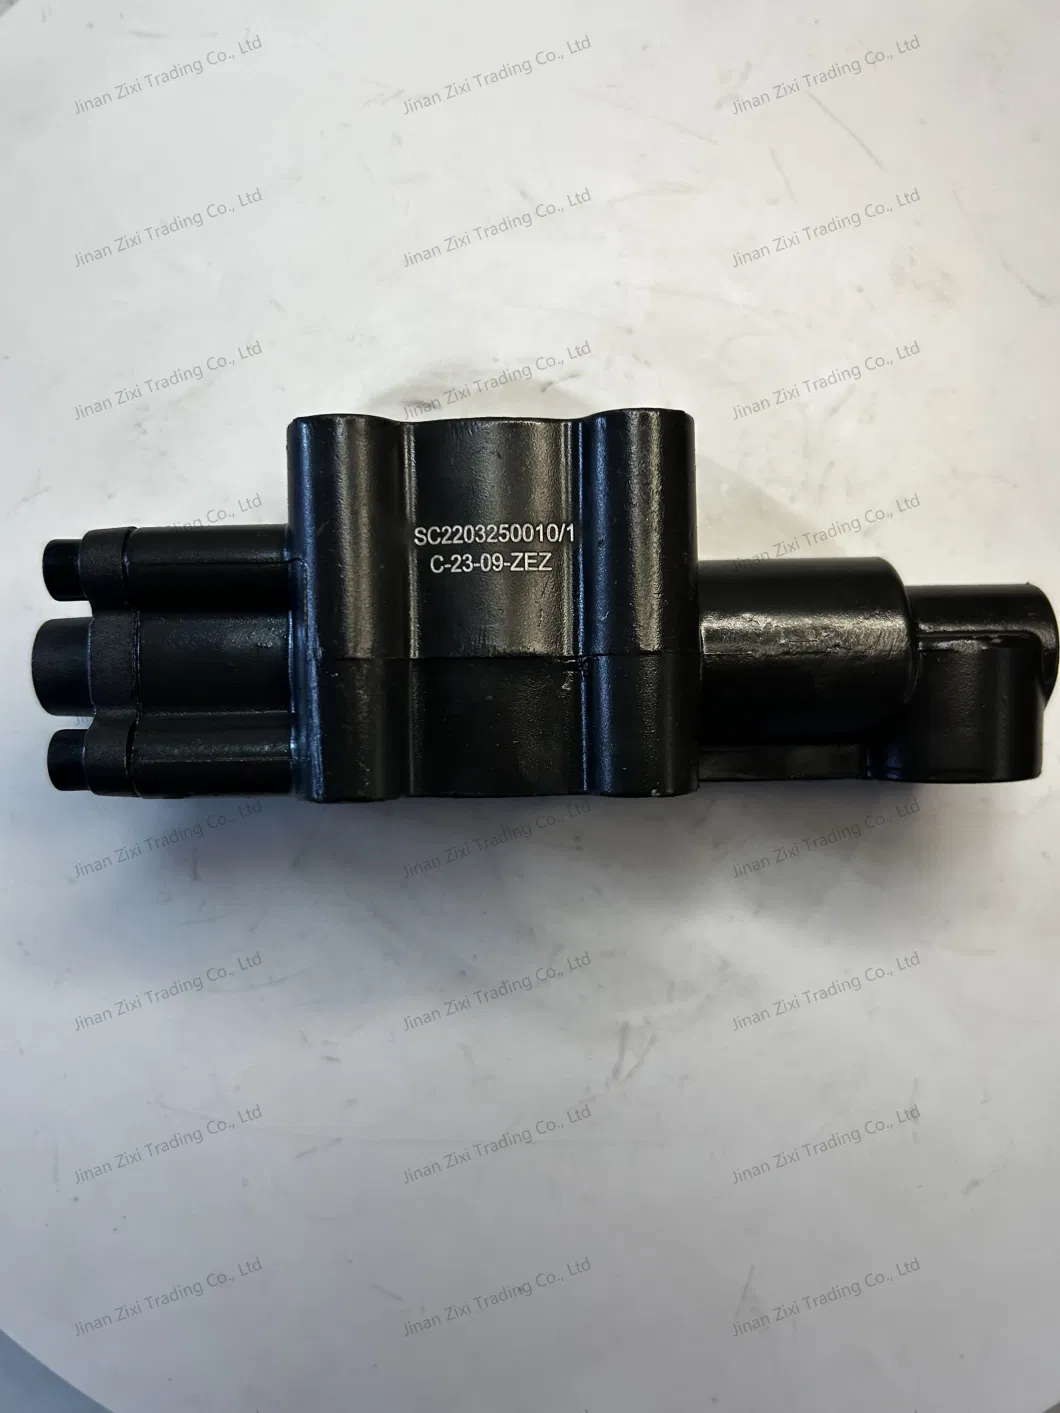 Wg2203250010 HOWO Truck Parts, Good Quality, Low Price, High Quality Pneumatic Lock Valve